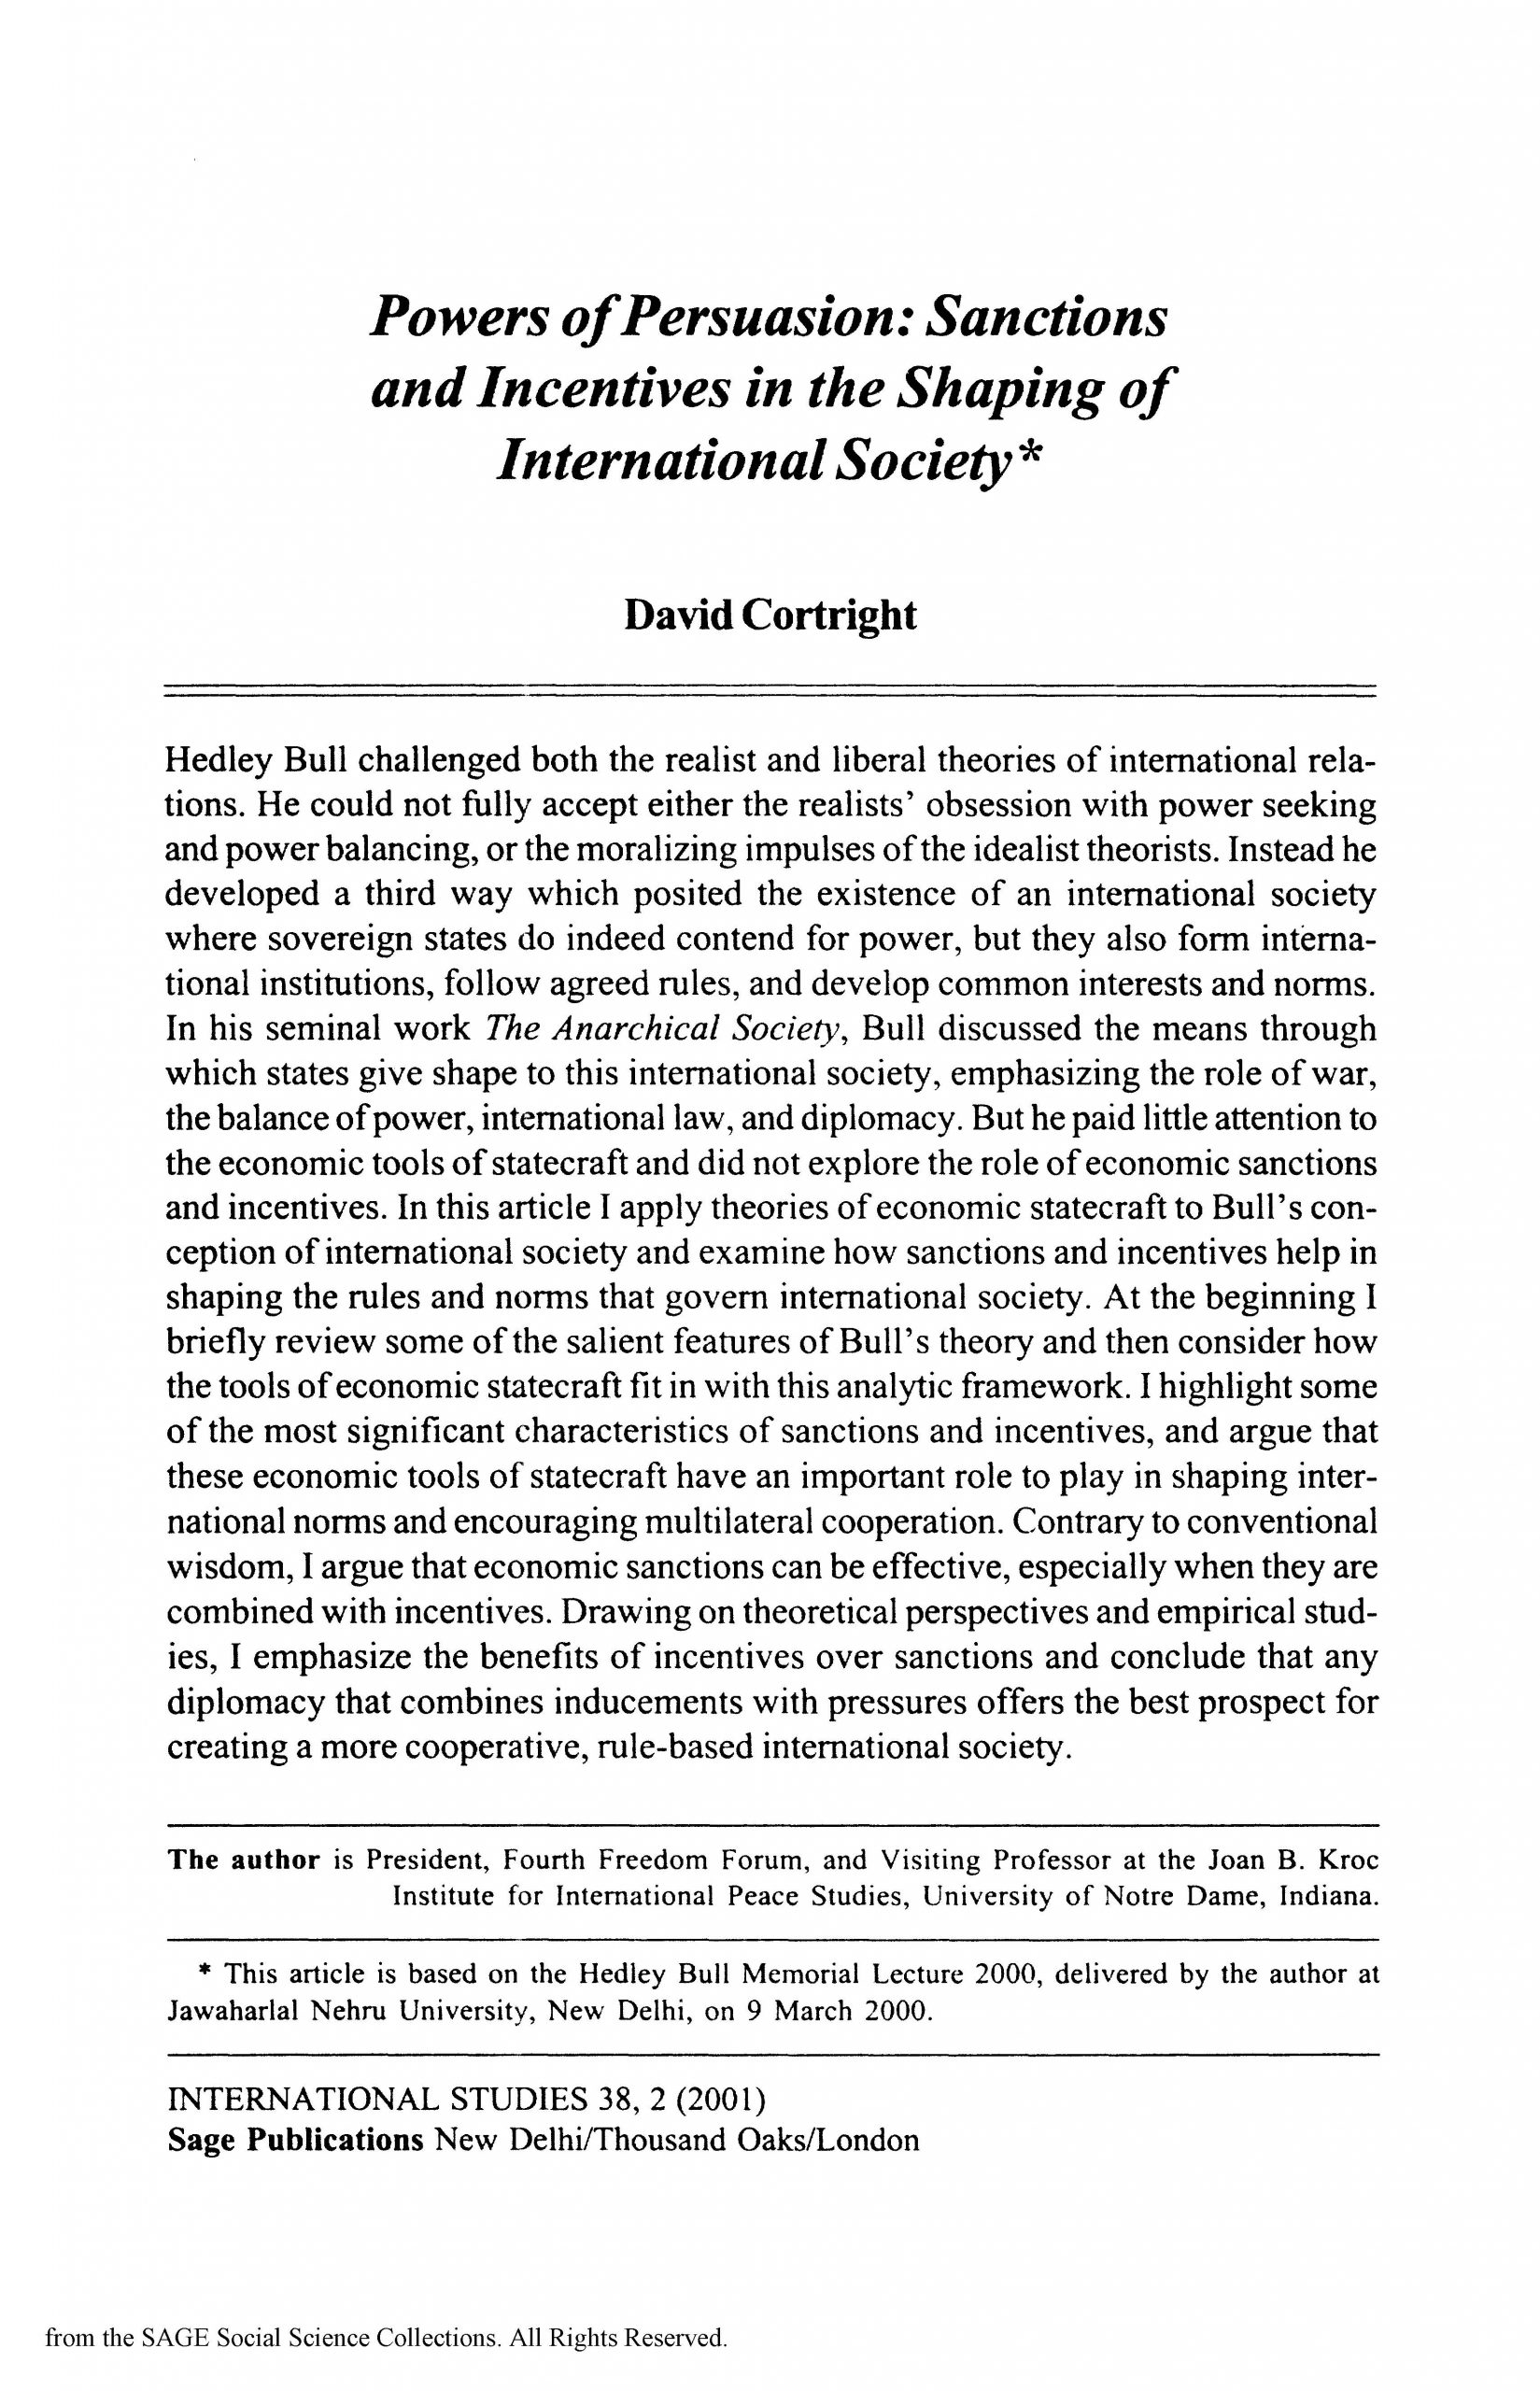 Powers of Persuasion: Sanctions and Incentives in the Shaping of International Society